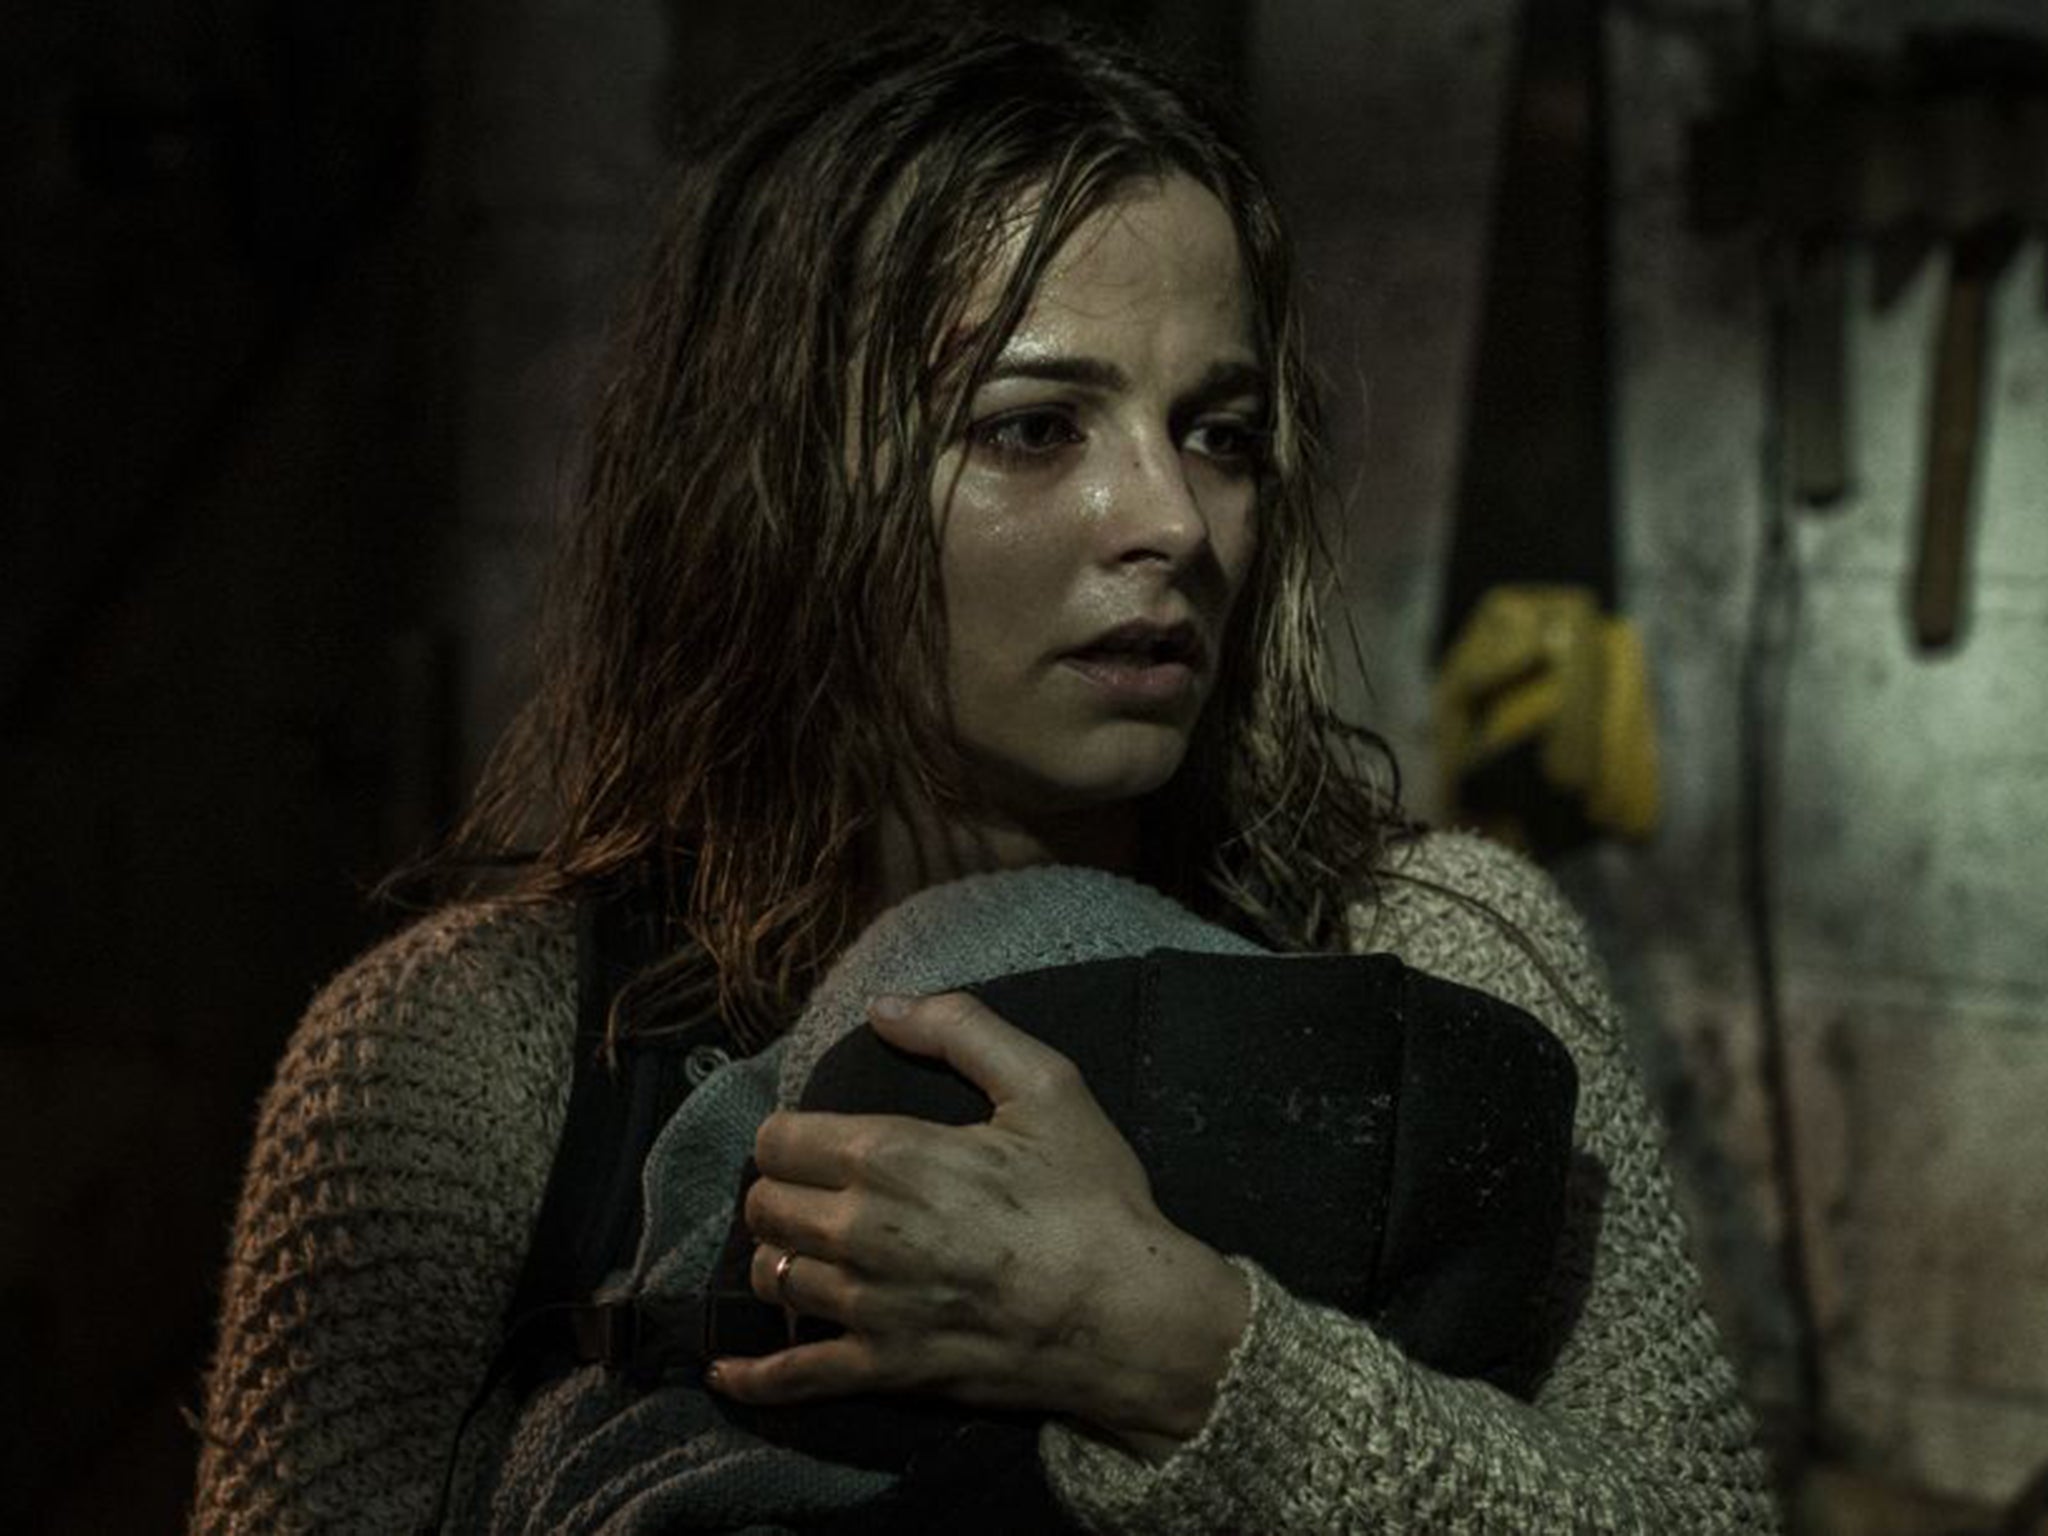 'The Hallow' is a visually striking horror set deep in a rural Irish community